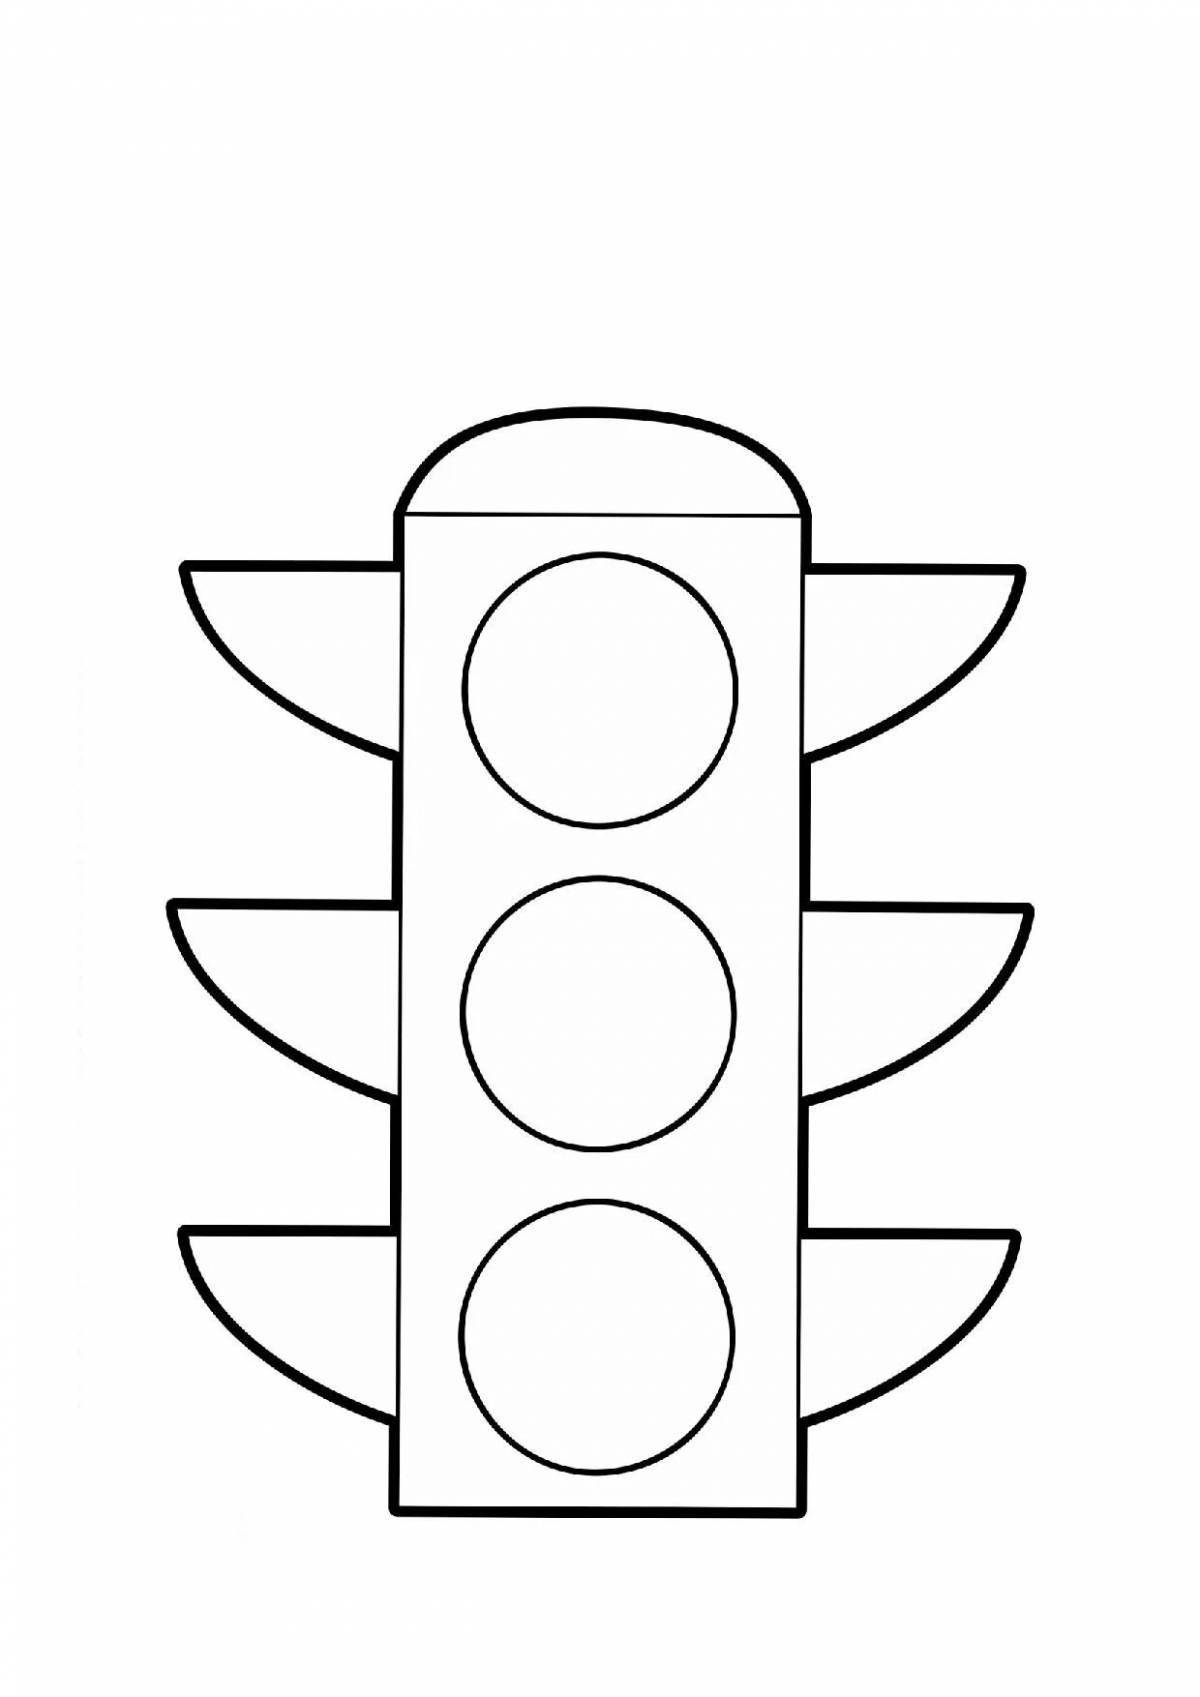 Drawing of a glowing traffic light